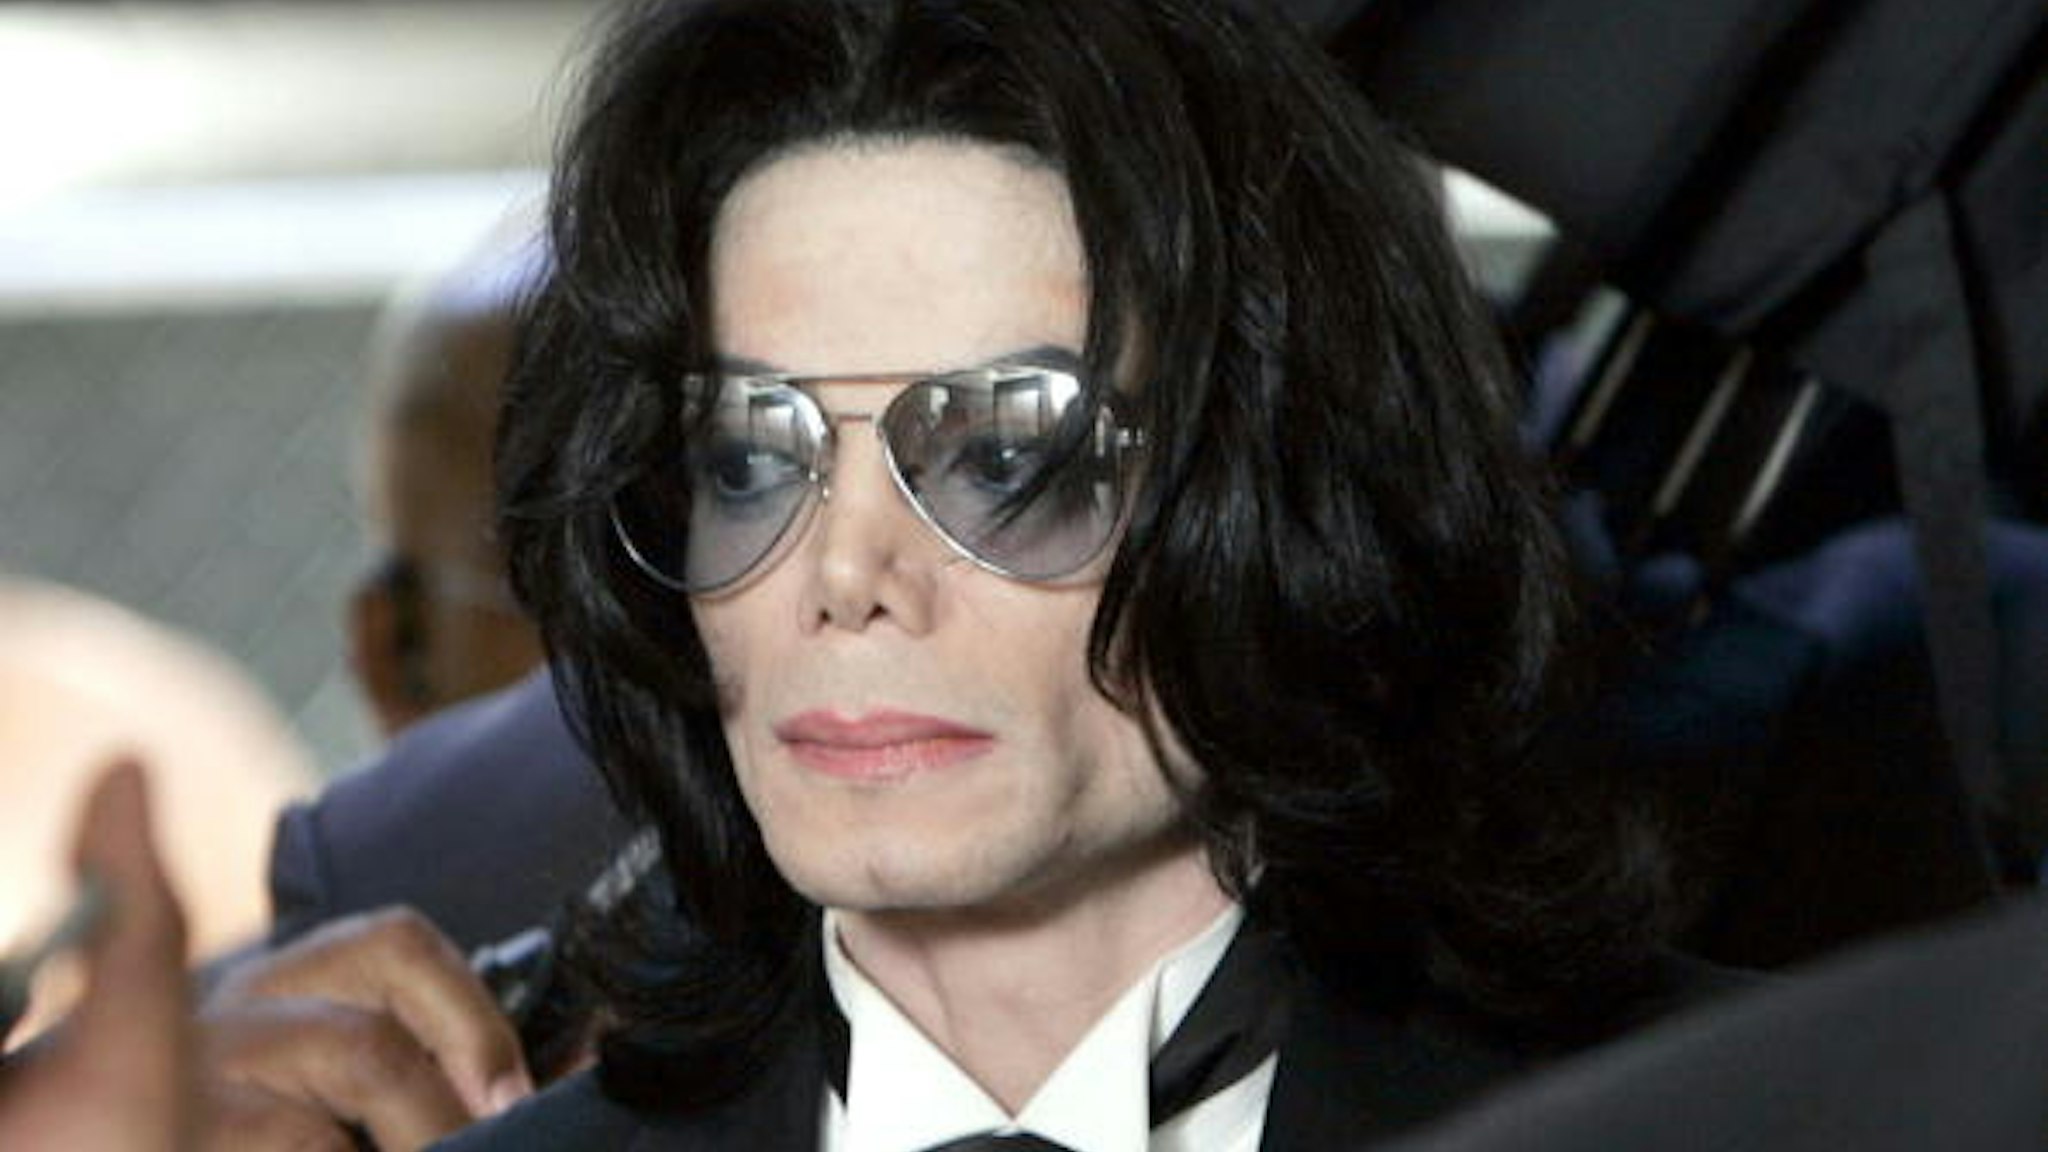 SANTA MARIA, CA - JUNE 13: Michael Jackson prepares to enter the Santa Barbara County Superior Court to hear the verdict read in his child molestation case June 13, 2005 in Santa Maria, California. After seven days of deliberation the jury has reached a not guilty verdict on all 10 counts in the trial against Michael Jackson. Jackson was charged in a 10-count indictment with molesting a boy, plying him with liquor and conspiring to commit child abduction, false imprisonment and extortion. He pleaded innocent.